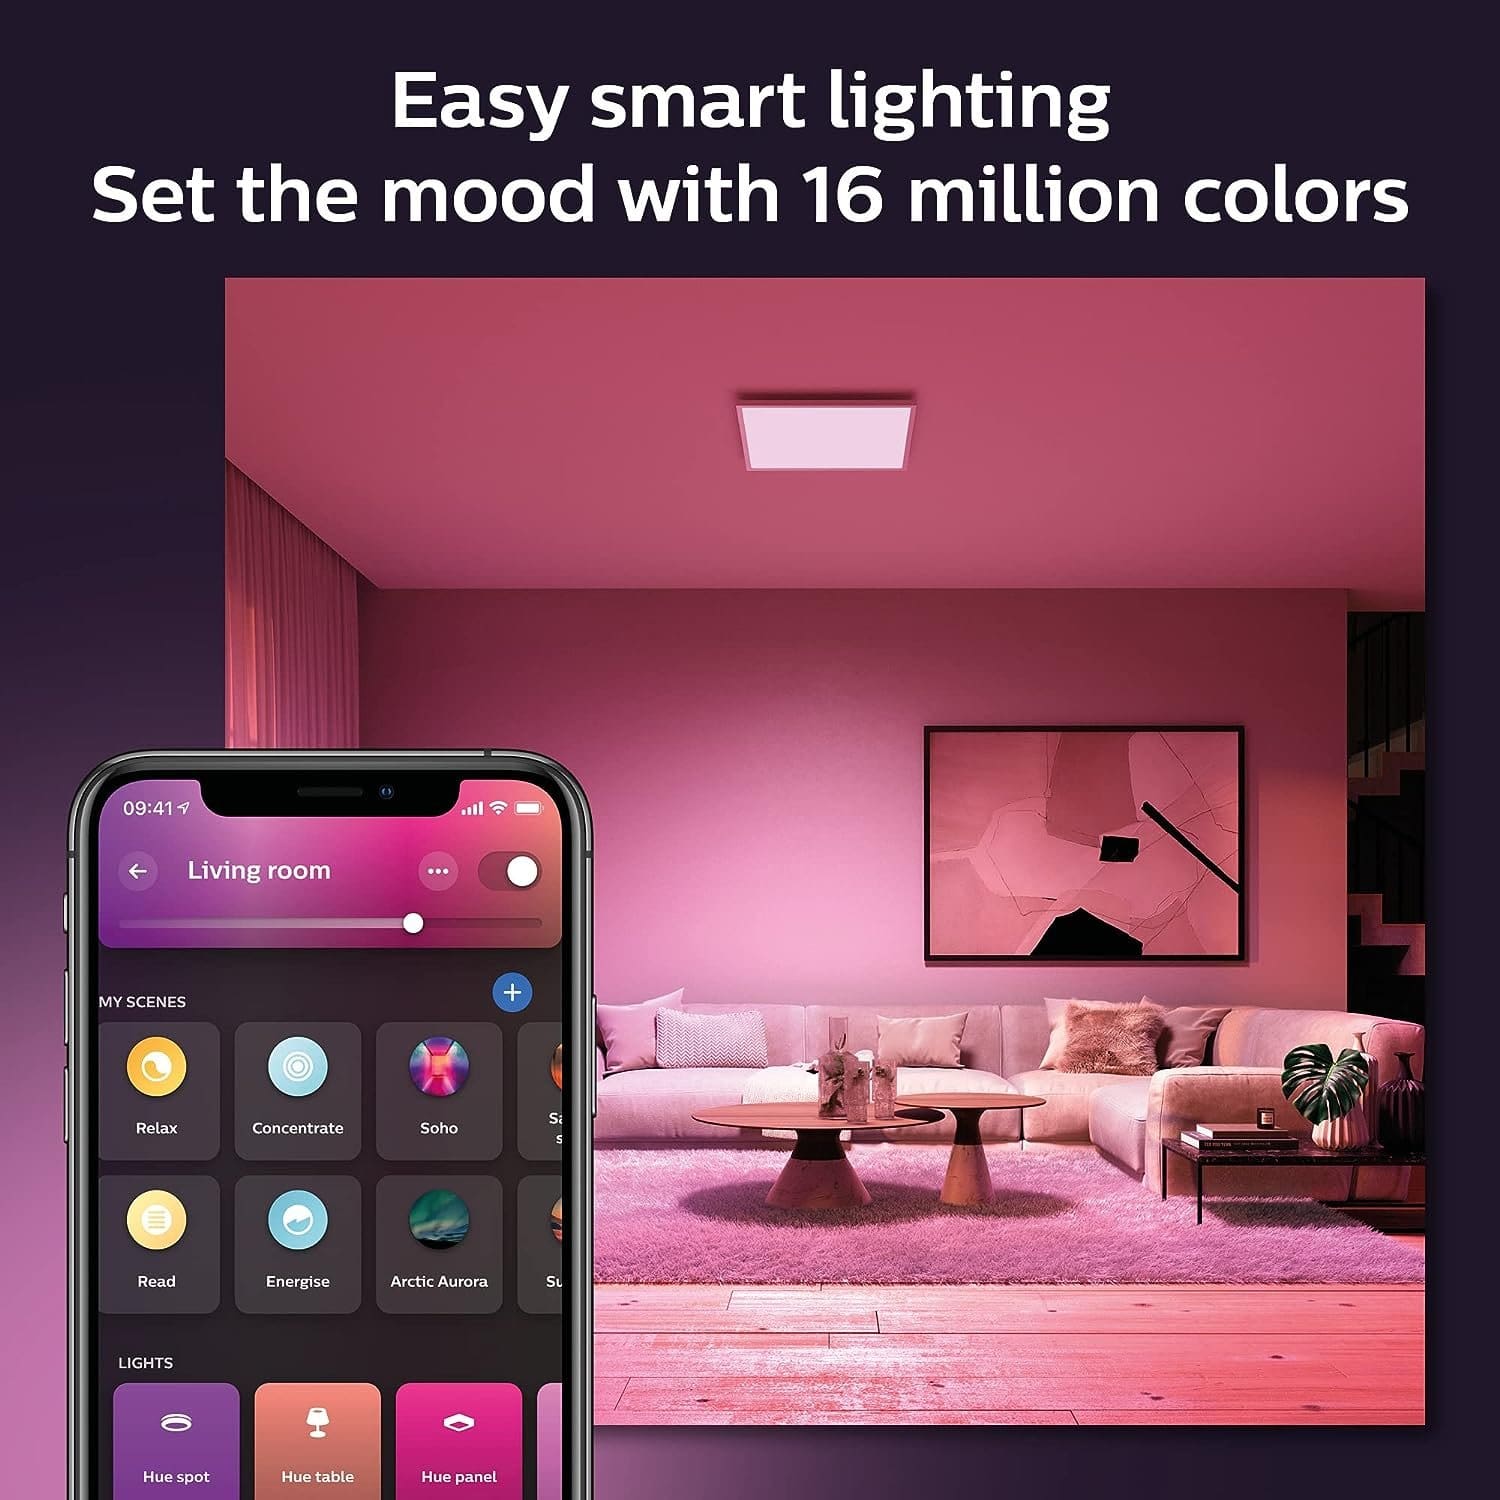 Can I Control Smart Lights Remotely When I’m Not At Home?